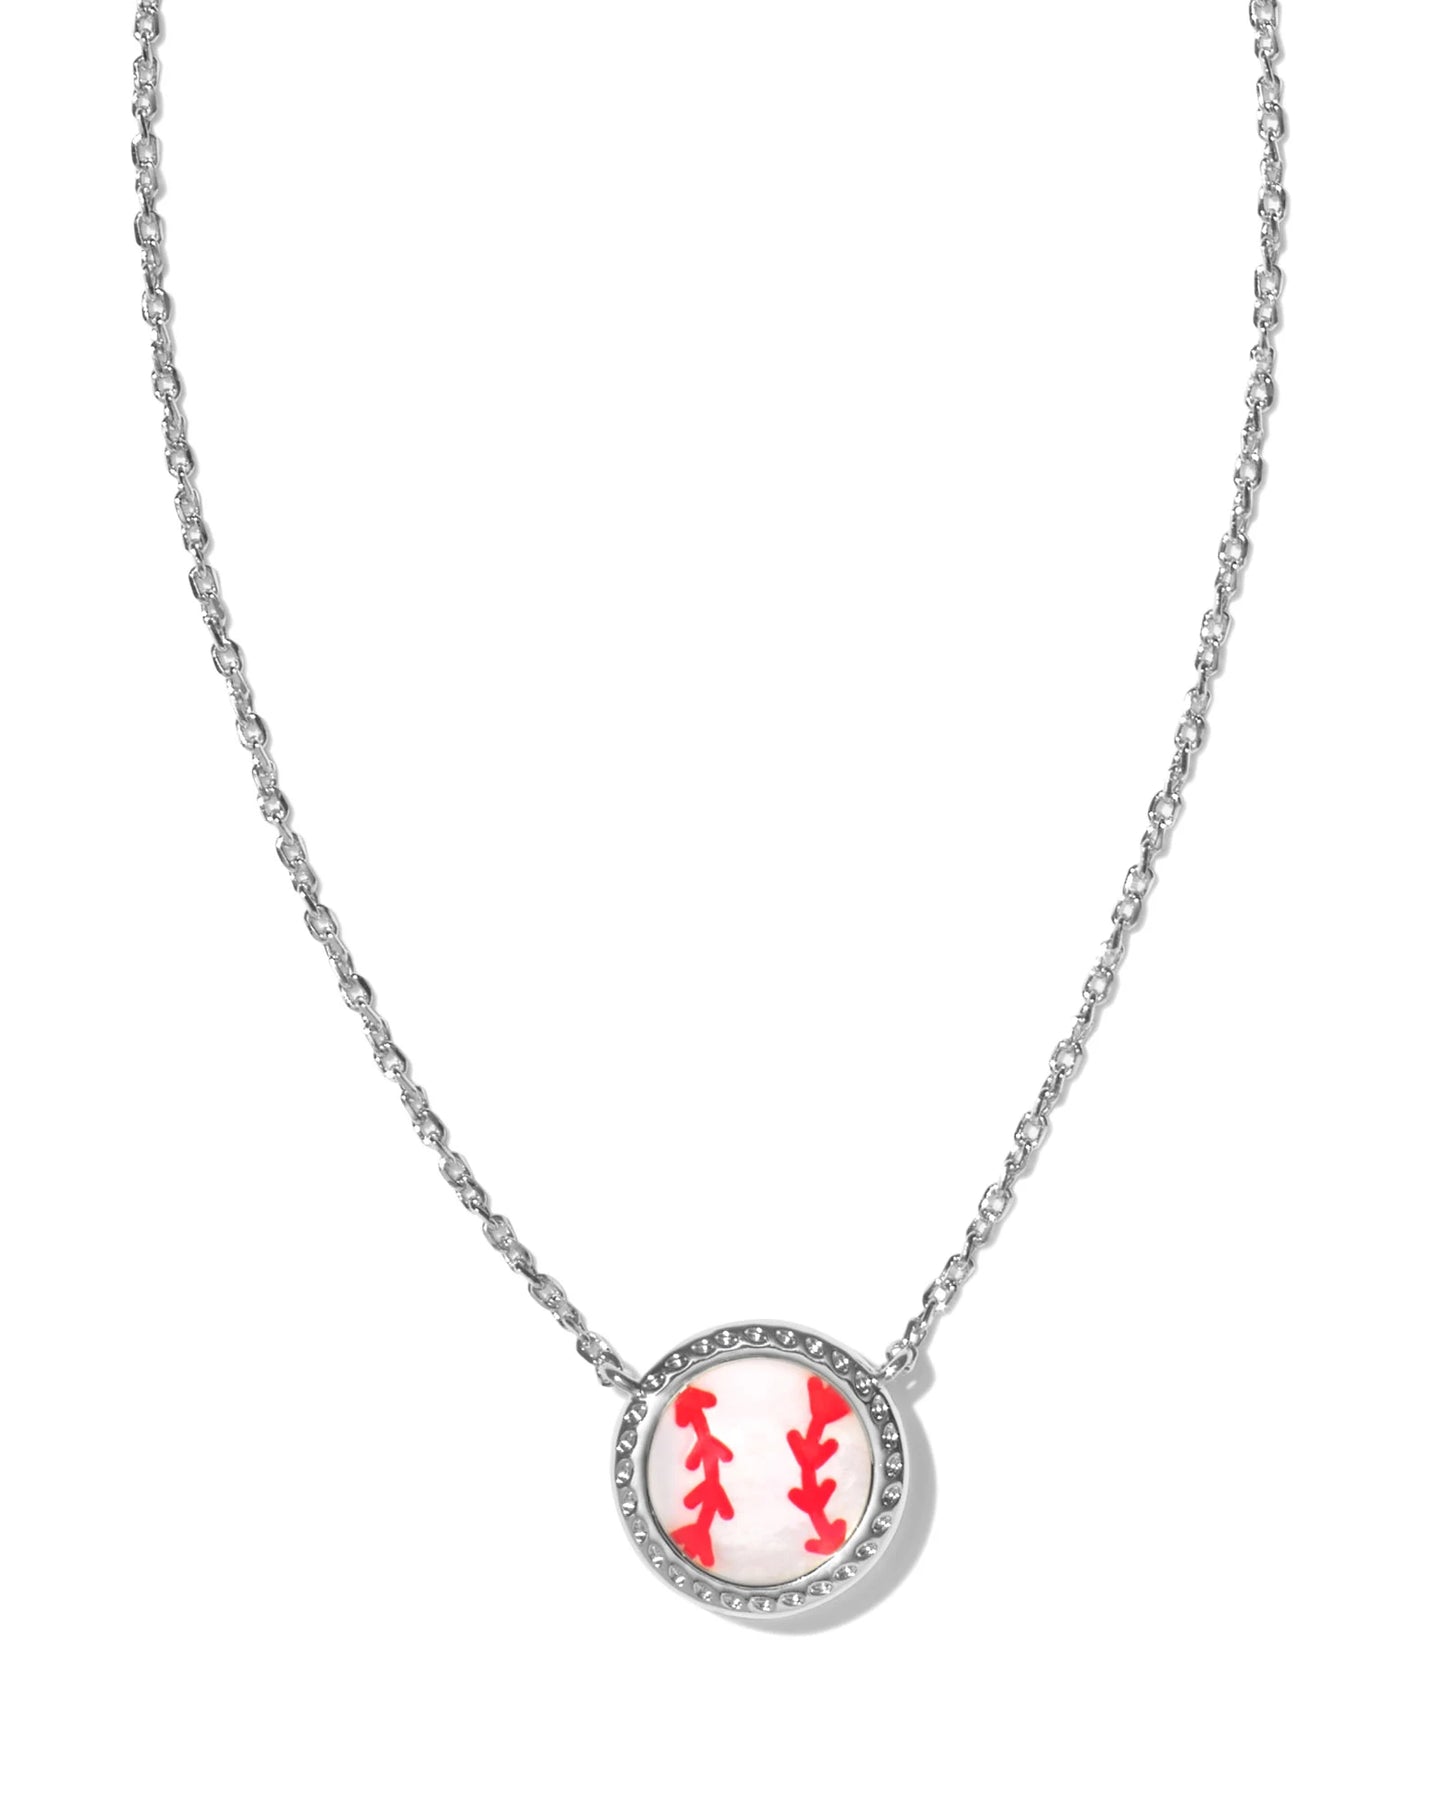 Kendra Scott Baseball Short Pendant Necklace Silver Ivory Mother of Pearl-Necklaces-Kendra Scott-N00558RHD-The Twisted Chandelier